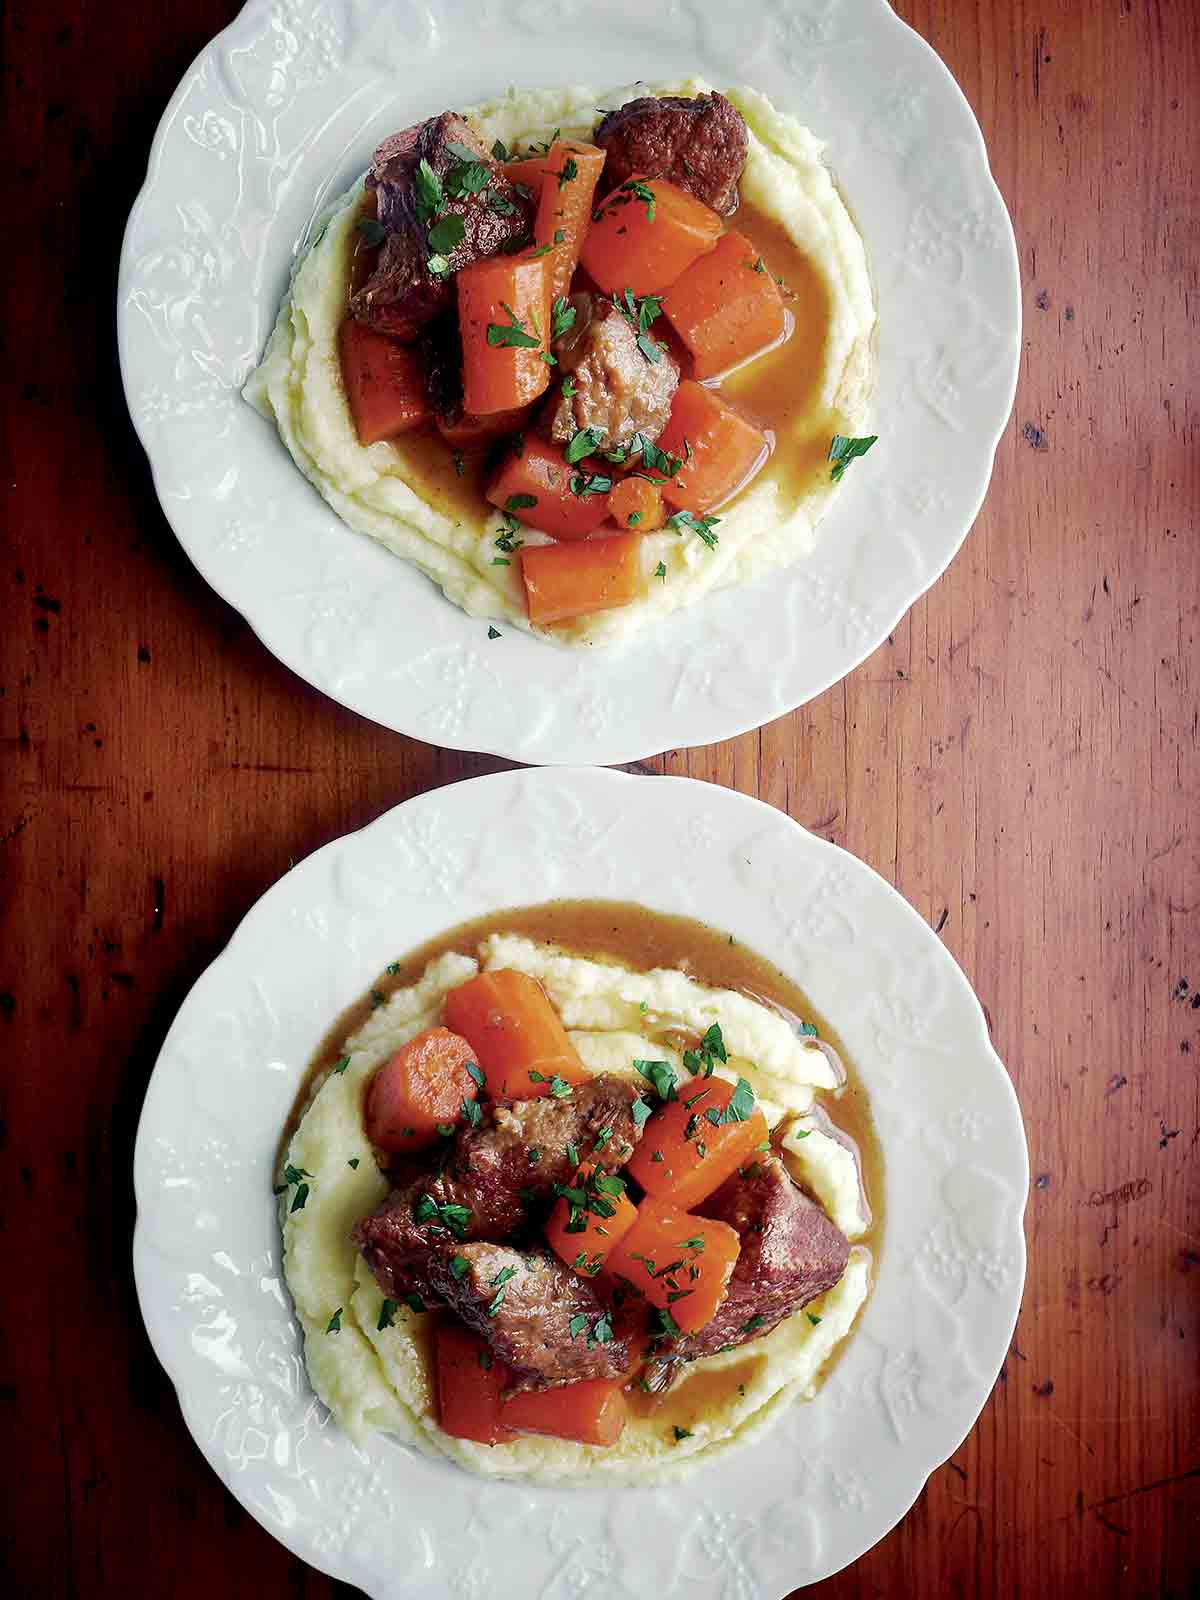 Braised Beef with Carrots Recipe | Leite's Culinaria